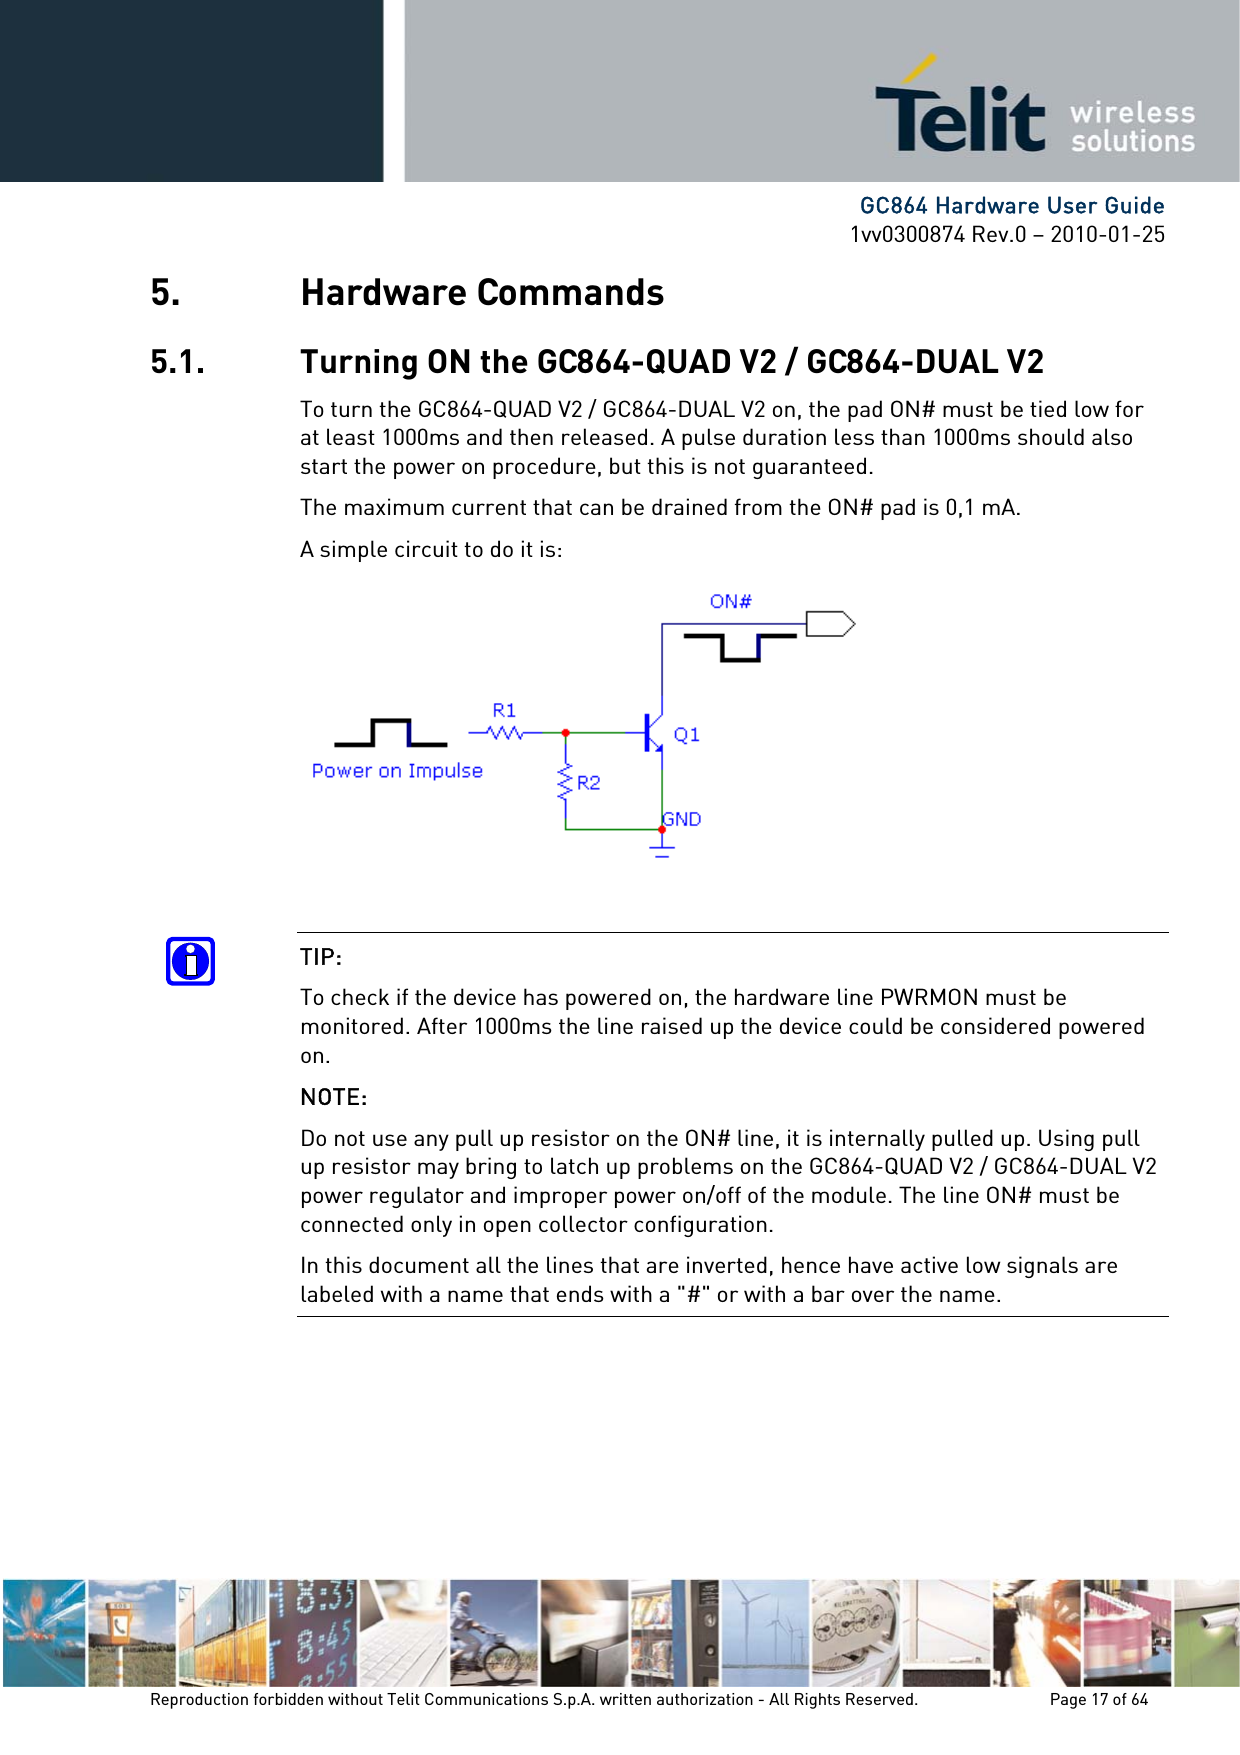      GC864 Hardware User Guide 1vv0300874 Rev.0 – 2010-01-25 Reproduction forbidden without Telit Communications S.p.A. written authorization - All Rights Reserved.    Page 17 of 64  5. Hardware Commands 5.1. Turning ON the GC864-QUAD V2 / GC864-DUAL V2 To turn the GC864-QUAD V2 / GC864-DUAL V2 on, the pad ON# must be tied low for at least 1000ms and then released. A pulse duration less than 1000ms should also start the power on procedure, but this is not guaranteed. The maximum current that can be drained from the ON# pad is 0,1 mA. A simple circuit to do it is:   TIP:  To check if the device has powered on, the hardware line PWRMON must be monitored. After 1000ms the line raised up the device could be considered powered on. NOTE:  Do not use any pull up resistor on the ON# line, it is internally pulled up. Using pull up resistor may bring to latch up problems on the GC864-QUAD V2 / GC864-DUAL V2 power regulator and improper power on/off of the module. The line ON# must be connected only in open collector configuration. In this document all the lines that are inverted, hence have active low signals are labeled with a name that ends with a &quot;#&quot; or with a bar over the name.      